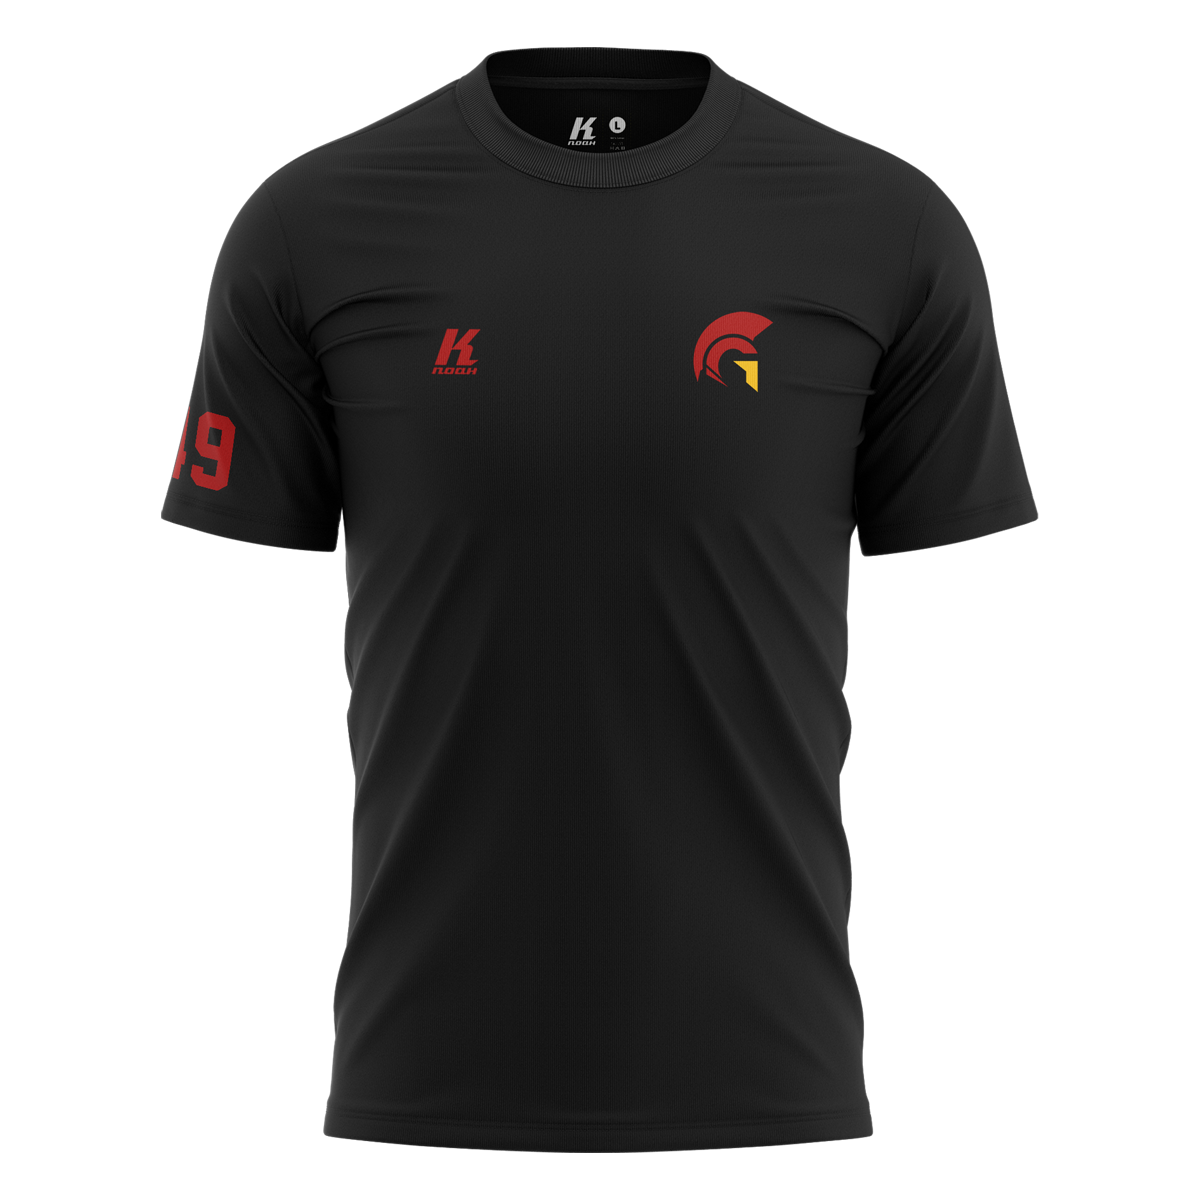 Gladiators Basic Tee Primary with Playernumber/Initials